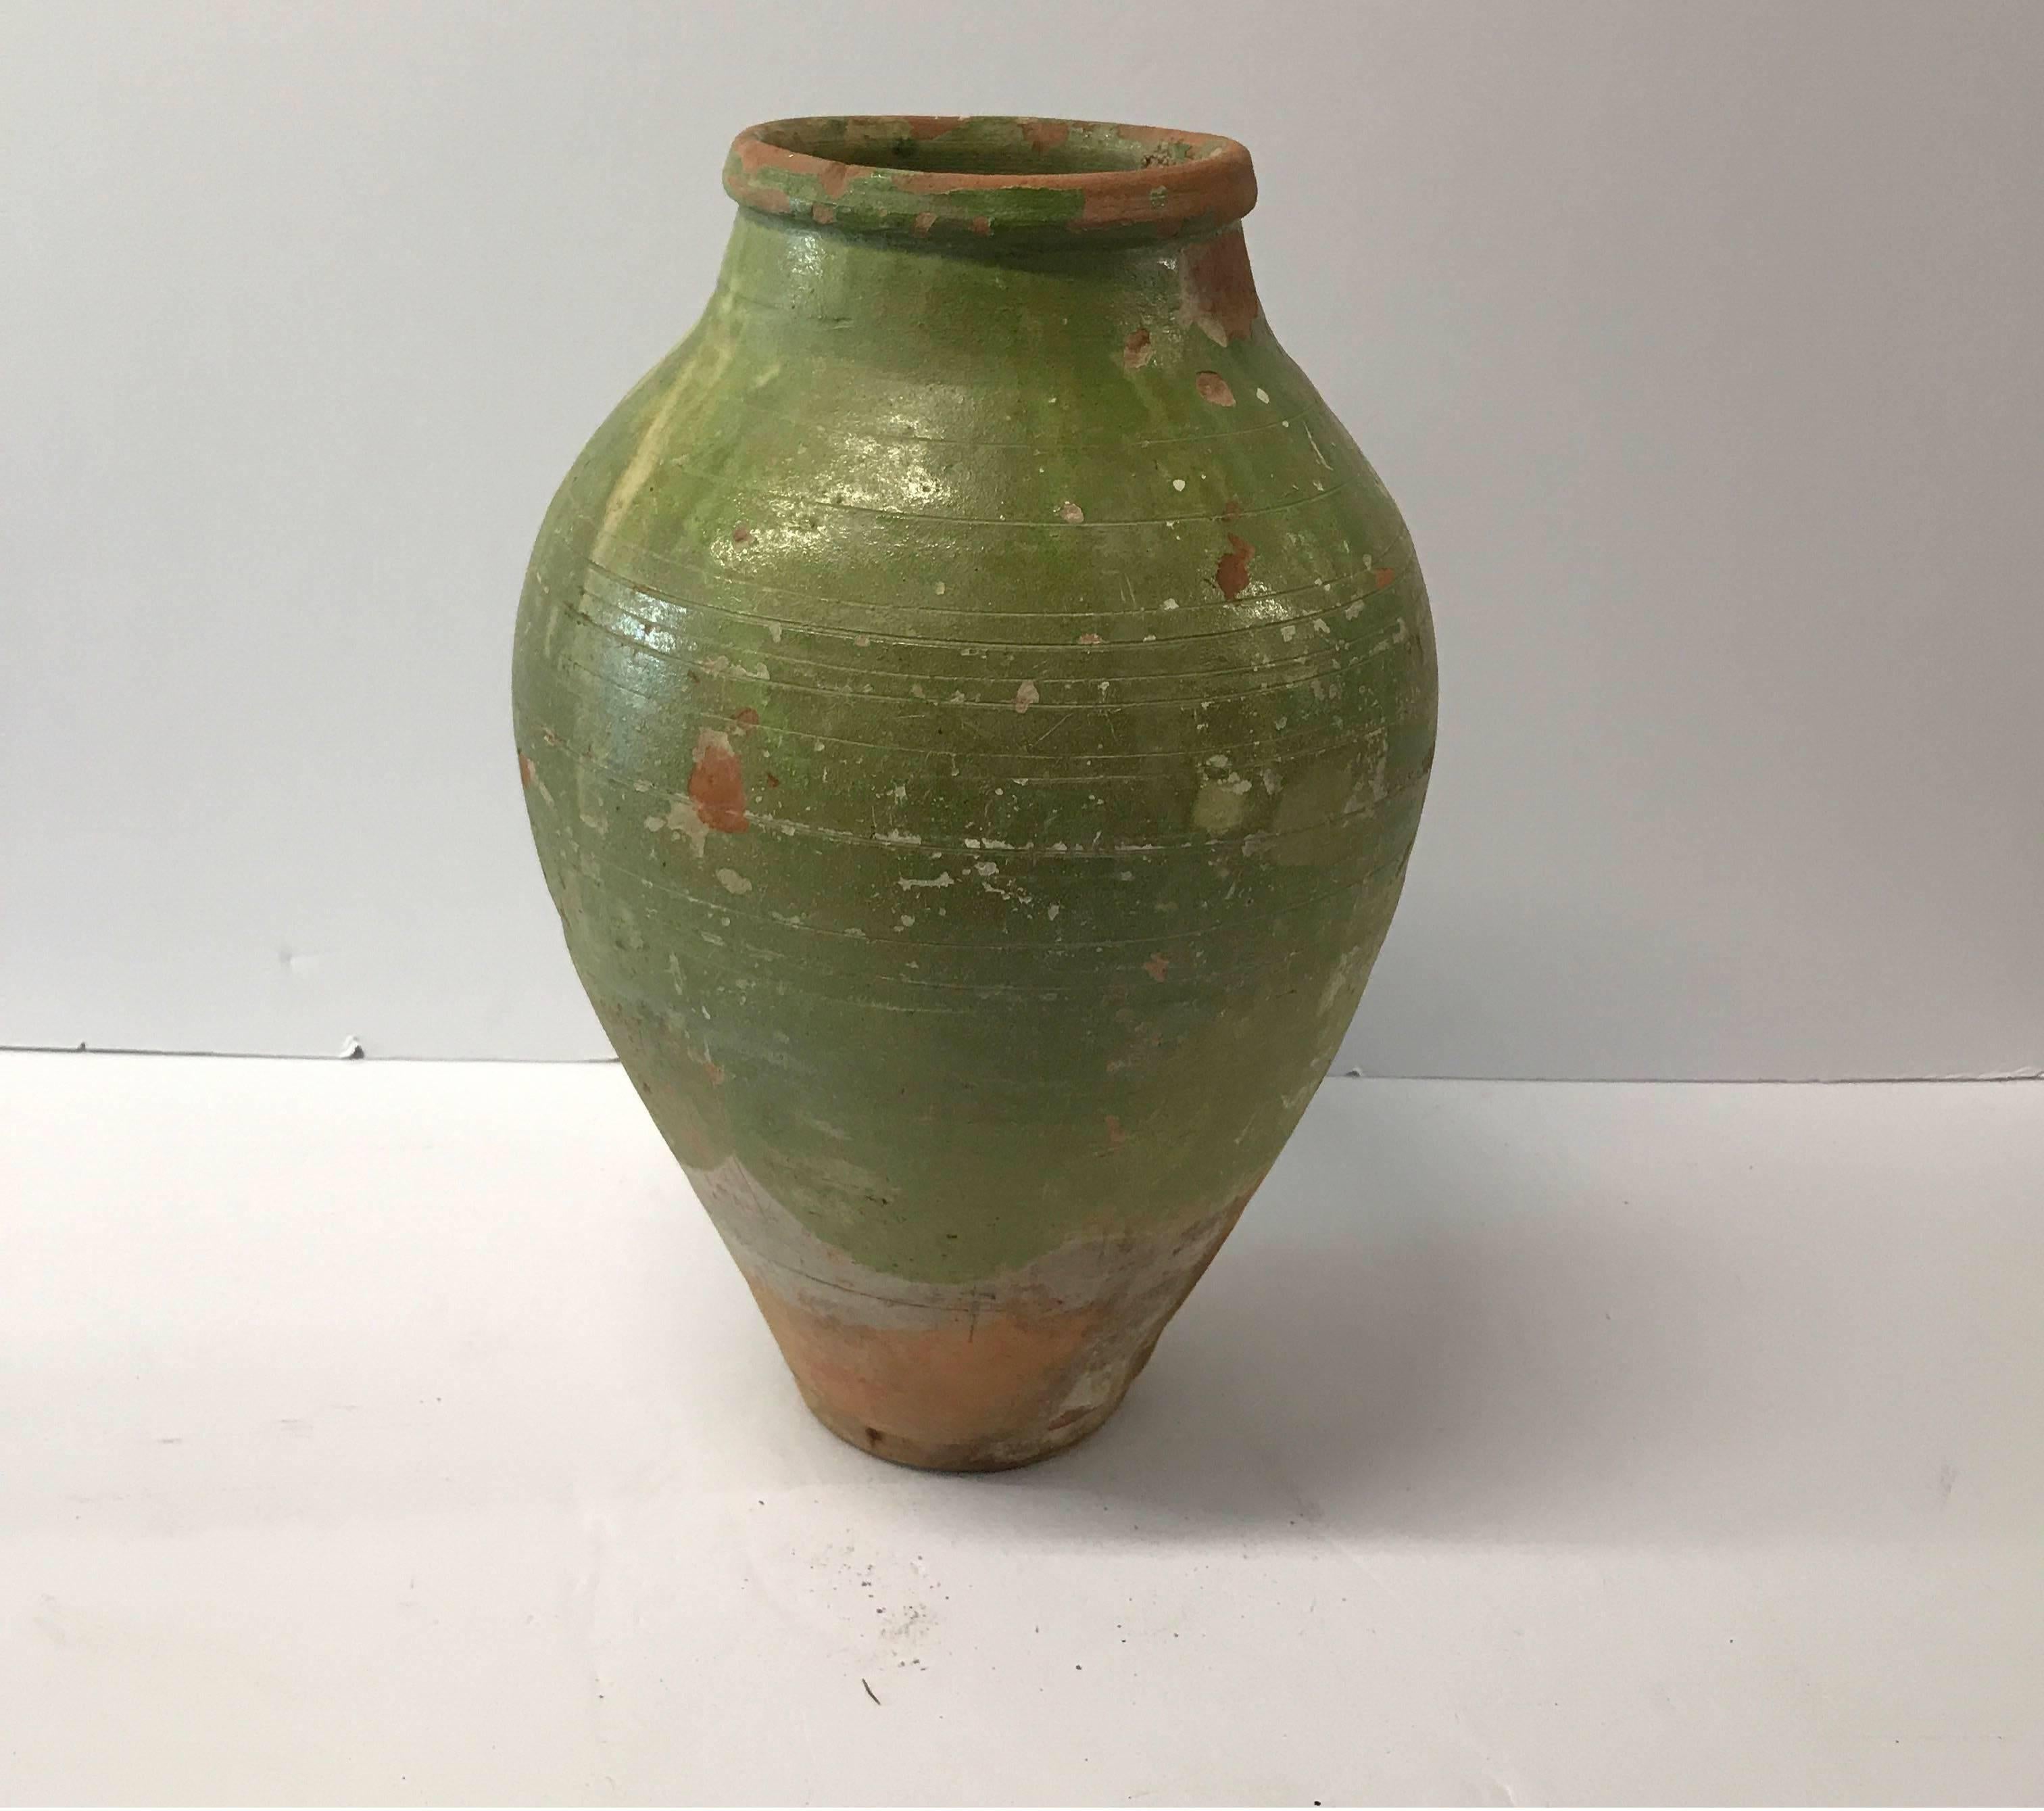 19th century Turkish terra cotta oil jar with green glaze 



Dimensions: 16.25 in H x 10.5 in diameter with a 5.75 in diameter opening and a 4.5 in base diameter.